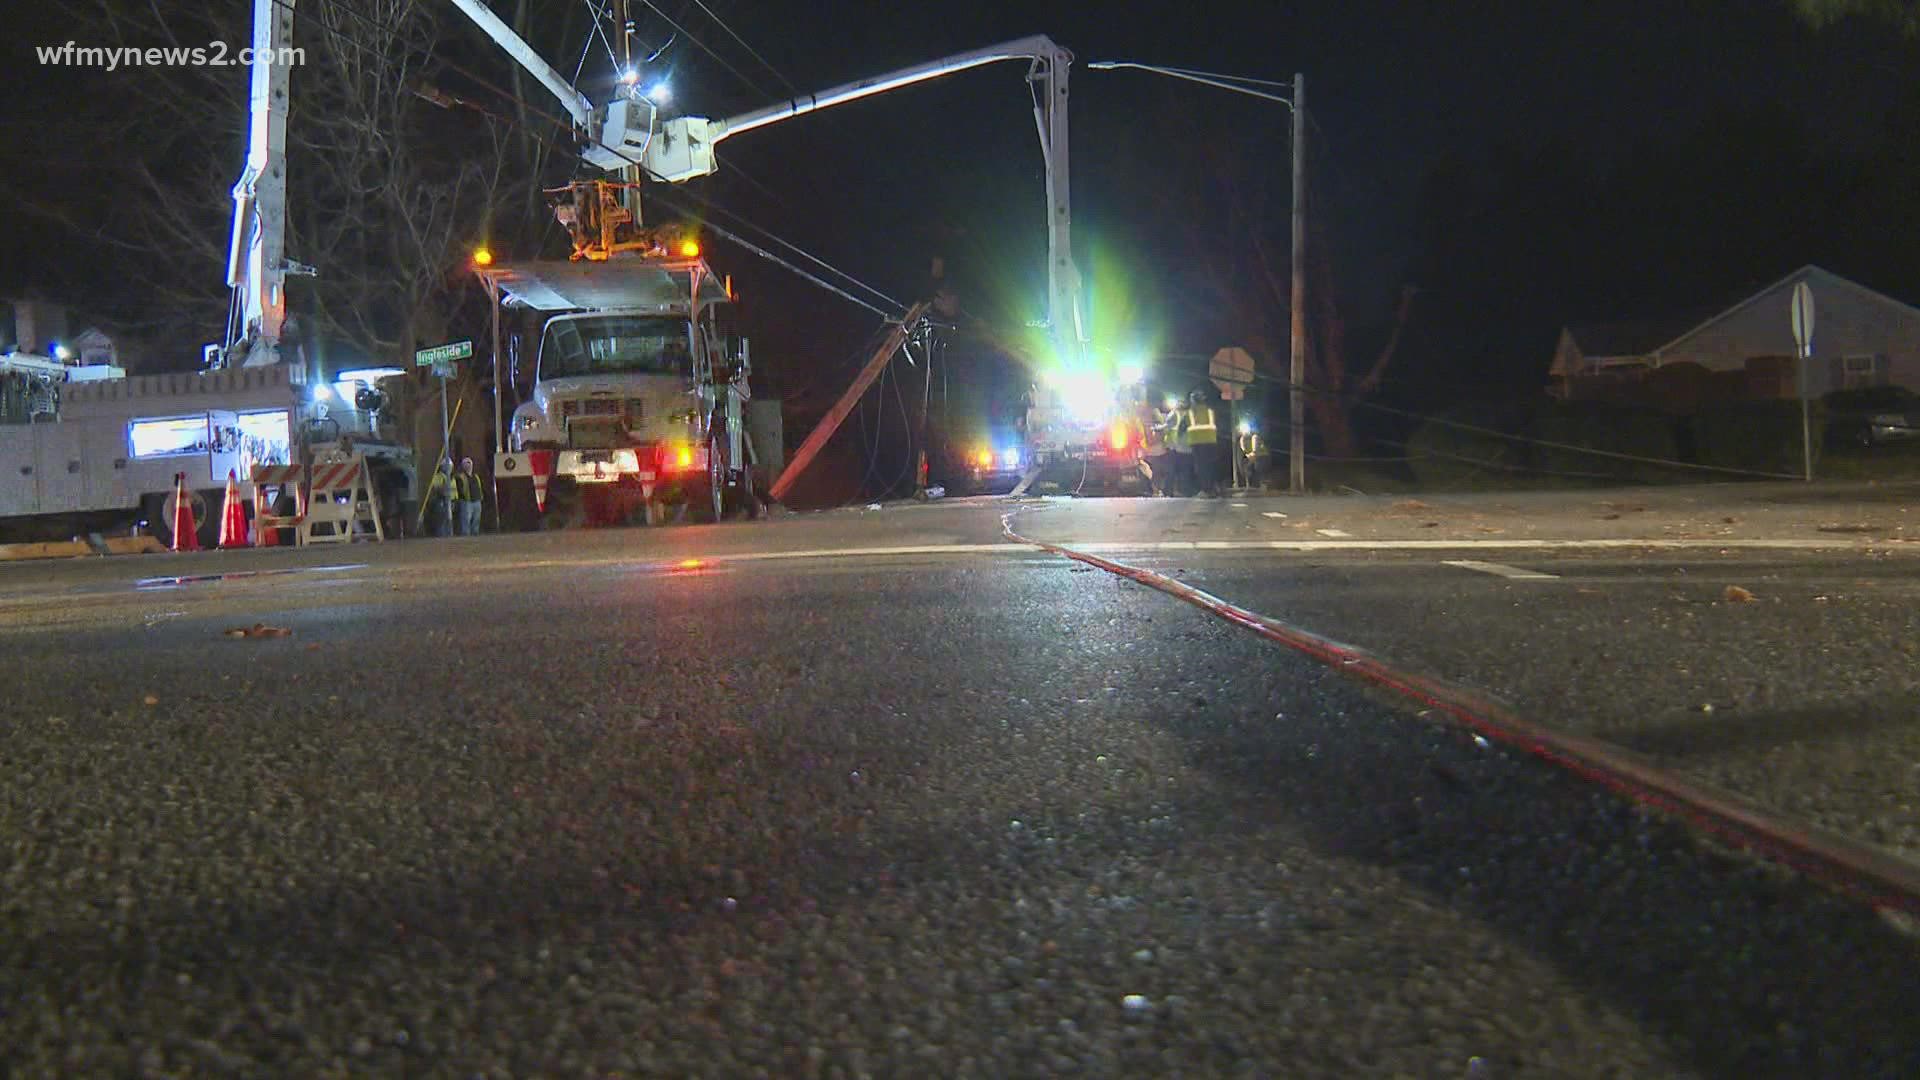 The power came back on late Wednesday night, but it will take longer for the damage to be repaired.